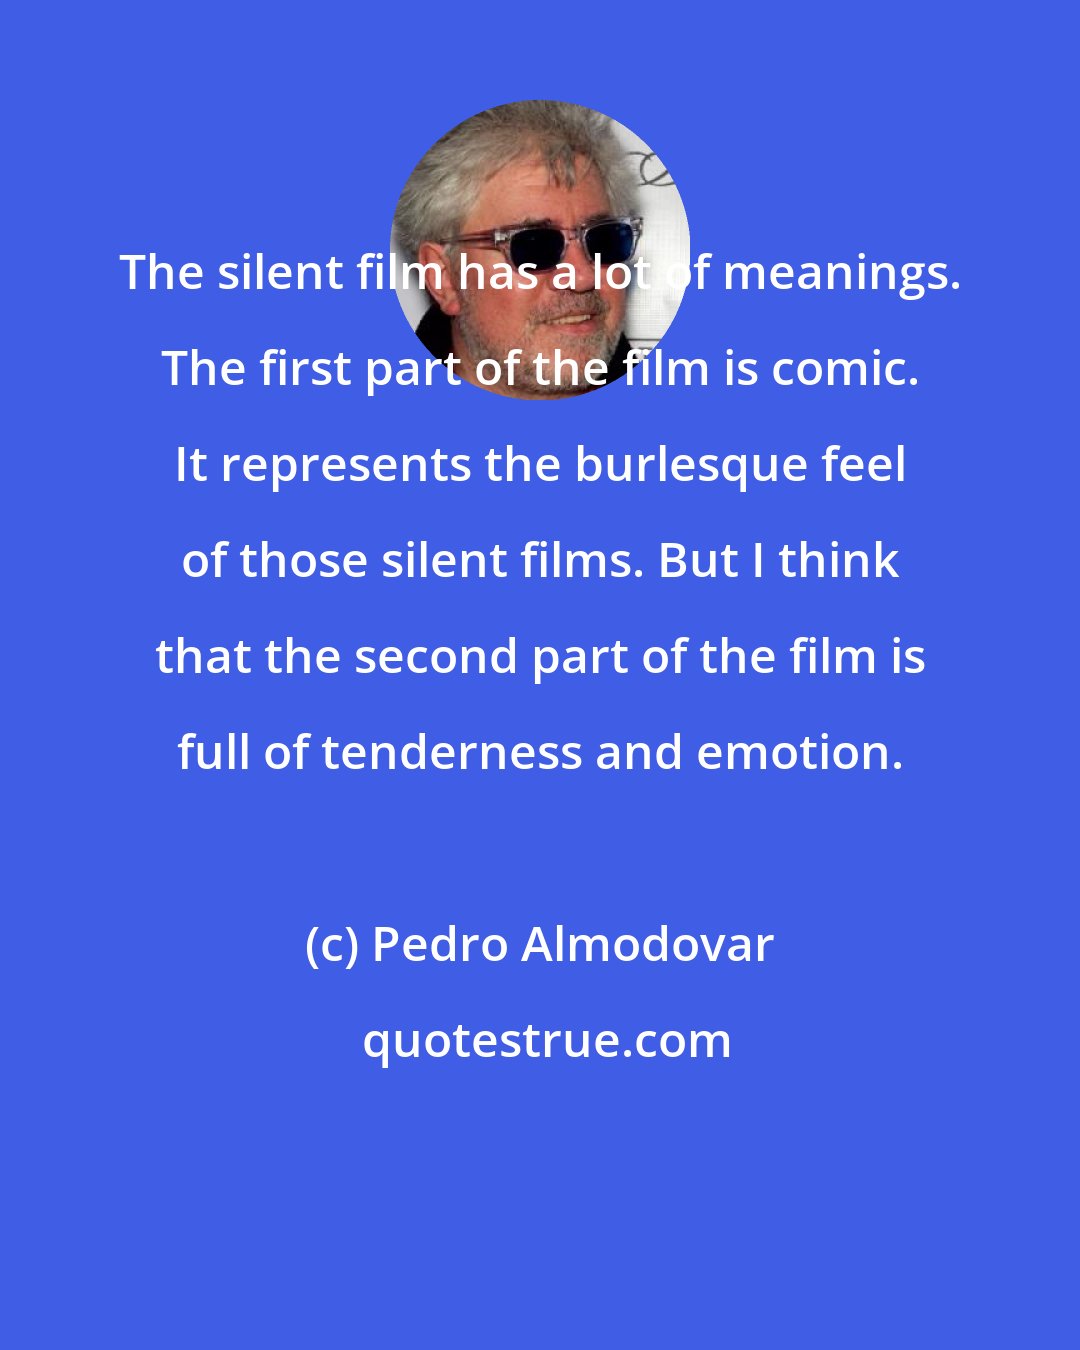 Pedro Almodovar: The silent film has a lot of meanings. The first part of the film is comic. It represents the burlesque feel of those silent films. But I think that the second part of the film is full of tenderness and emotion.